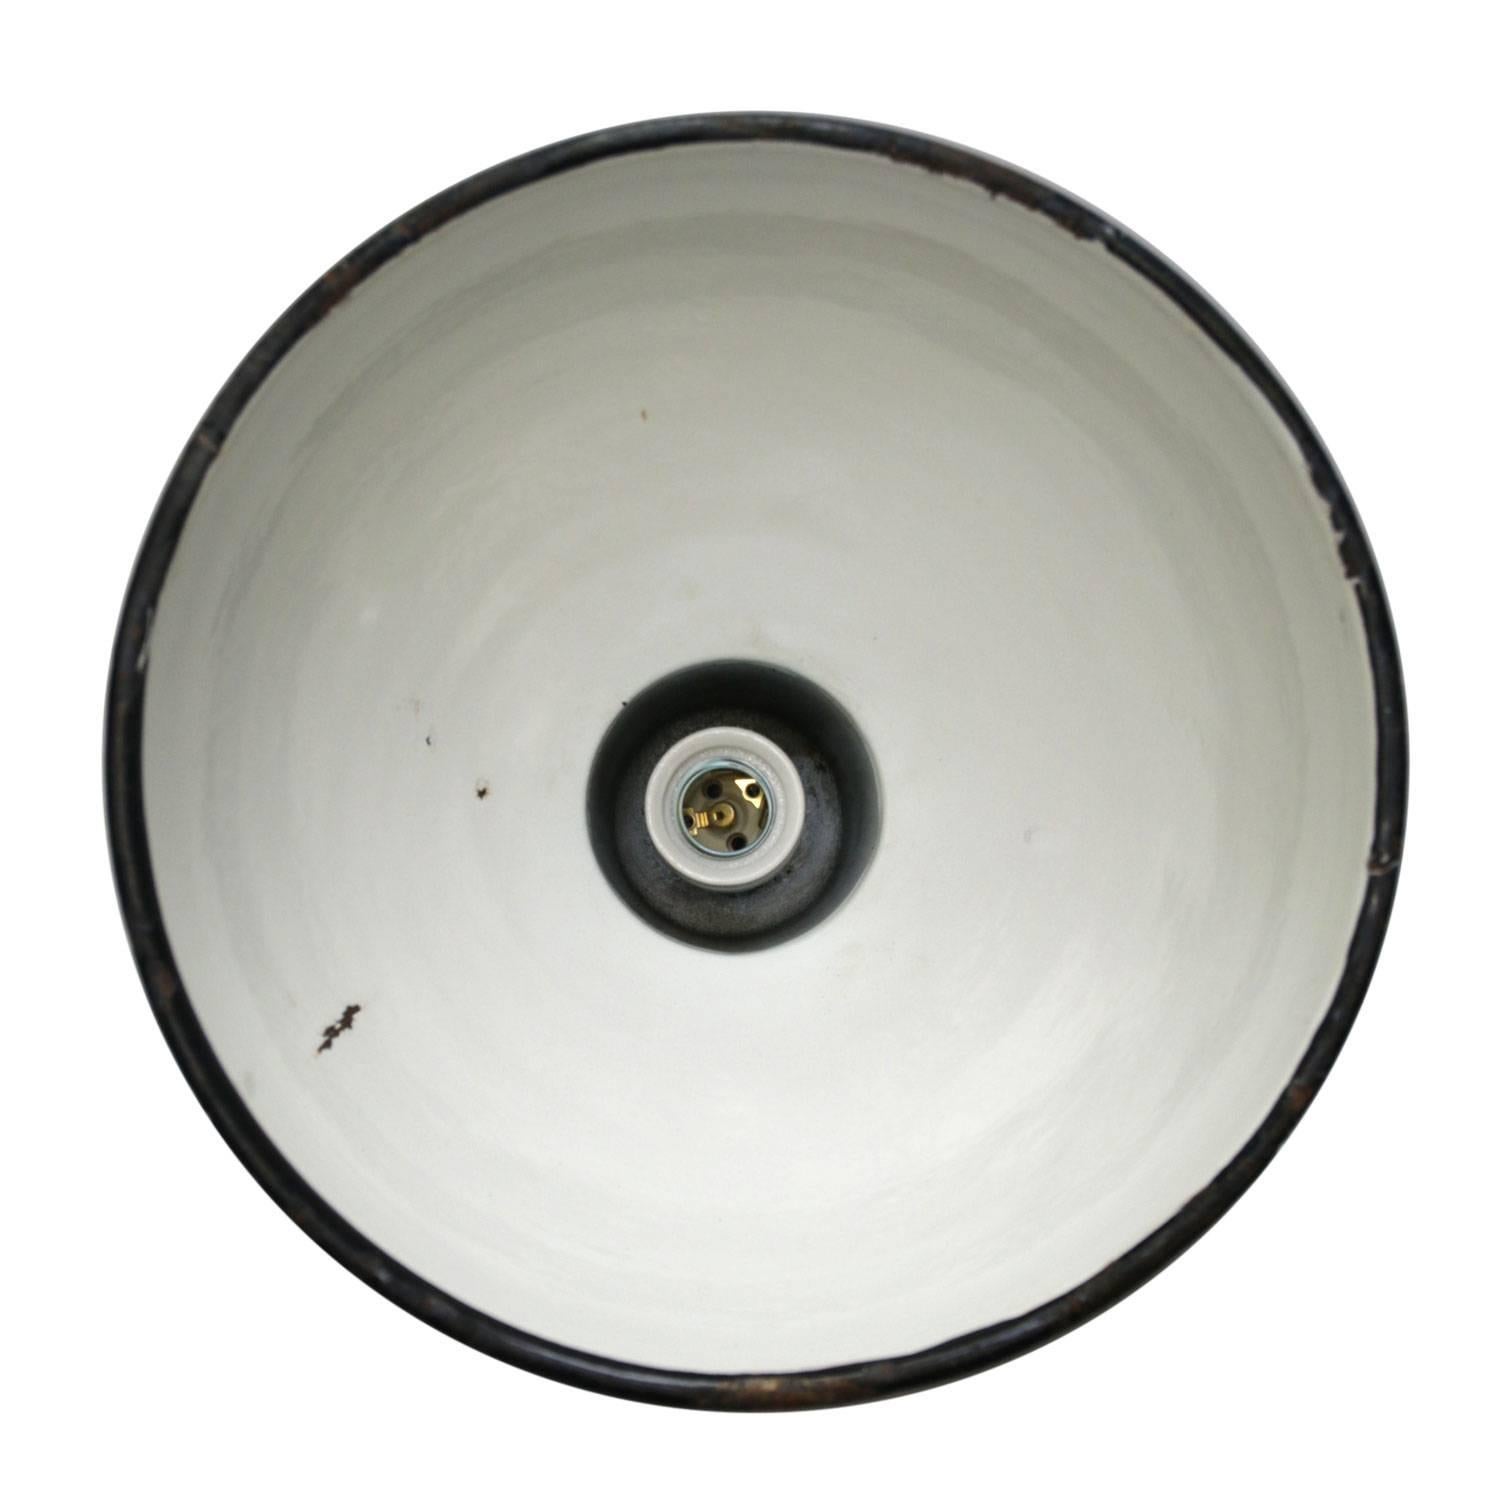 Industrial hanging light. Petrol enamel white interior.

Weight: 2.5 kg / 5.5 lb

All lamps have been made suitable by international standards for incandescent light bulbs, energy-efficient and LED bulbs. E26/E27 bulb holders and new wiring are CE